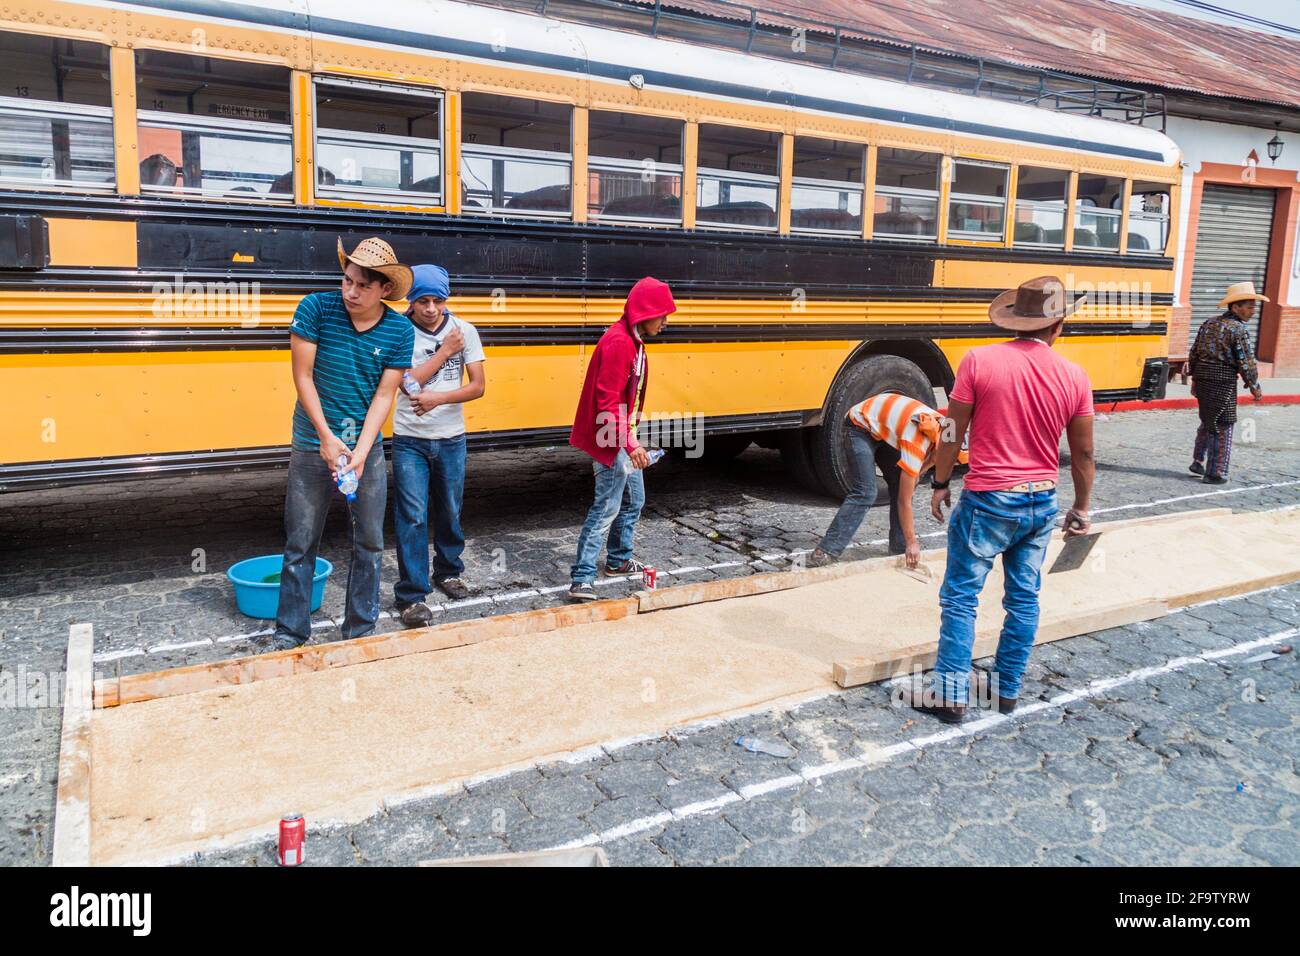 PANAJACHEL, GUATEMALA - MARCH 25, 2016: People decorate Easter carpets in front of a local bus in Panajachel village, Guatemala. Stock Photo